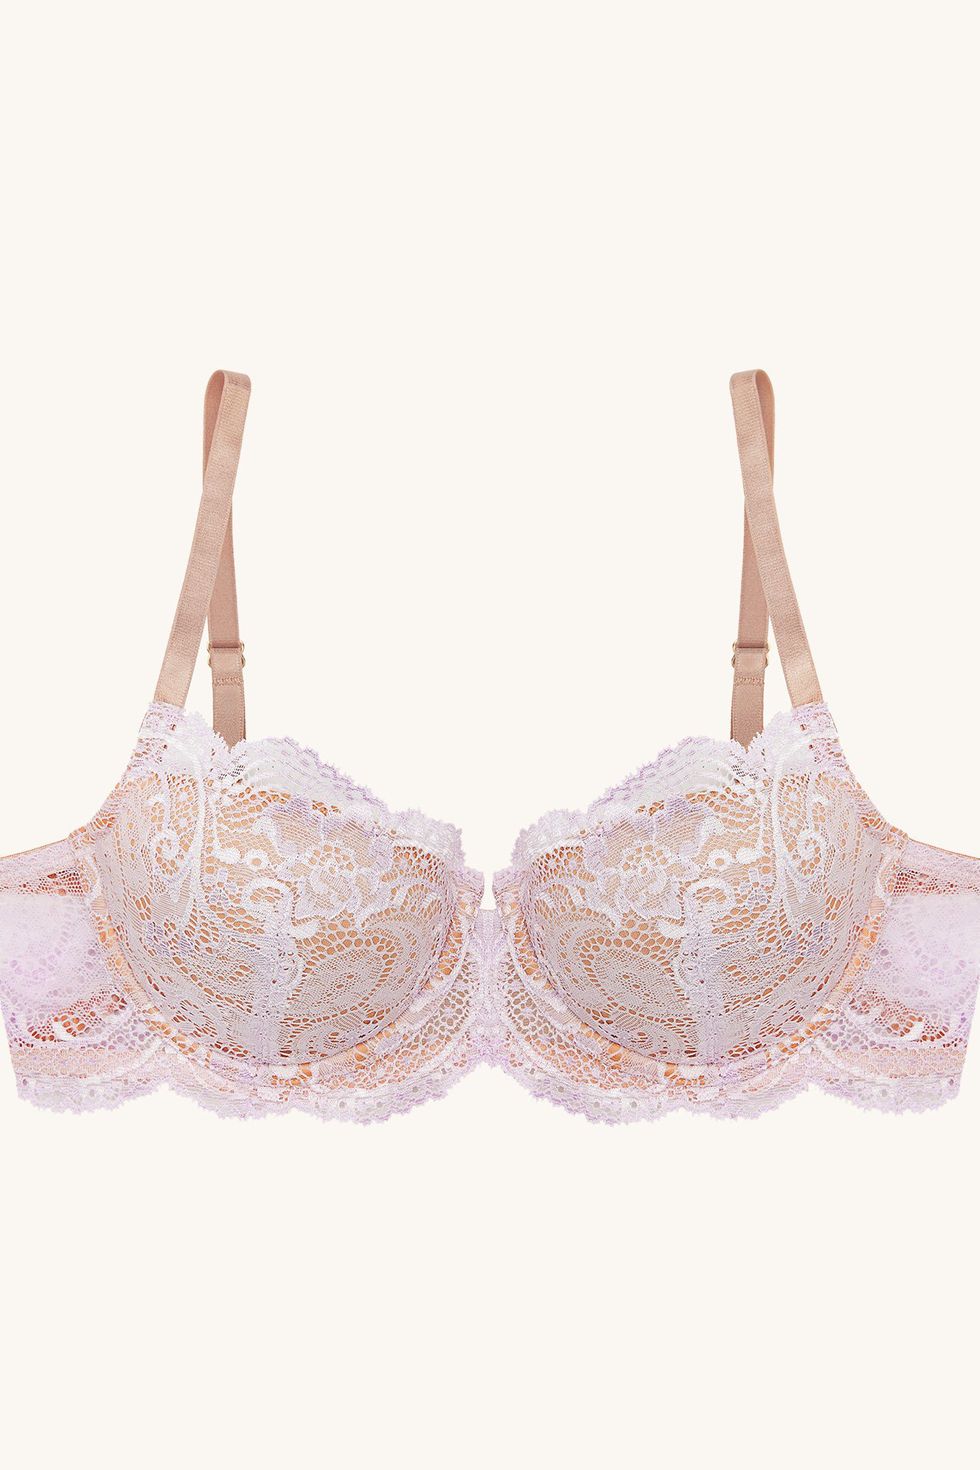 14 Best Bras for Small Breasts